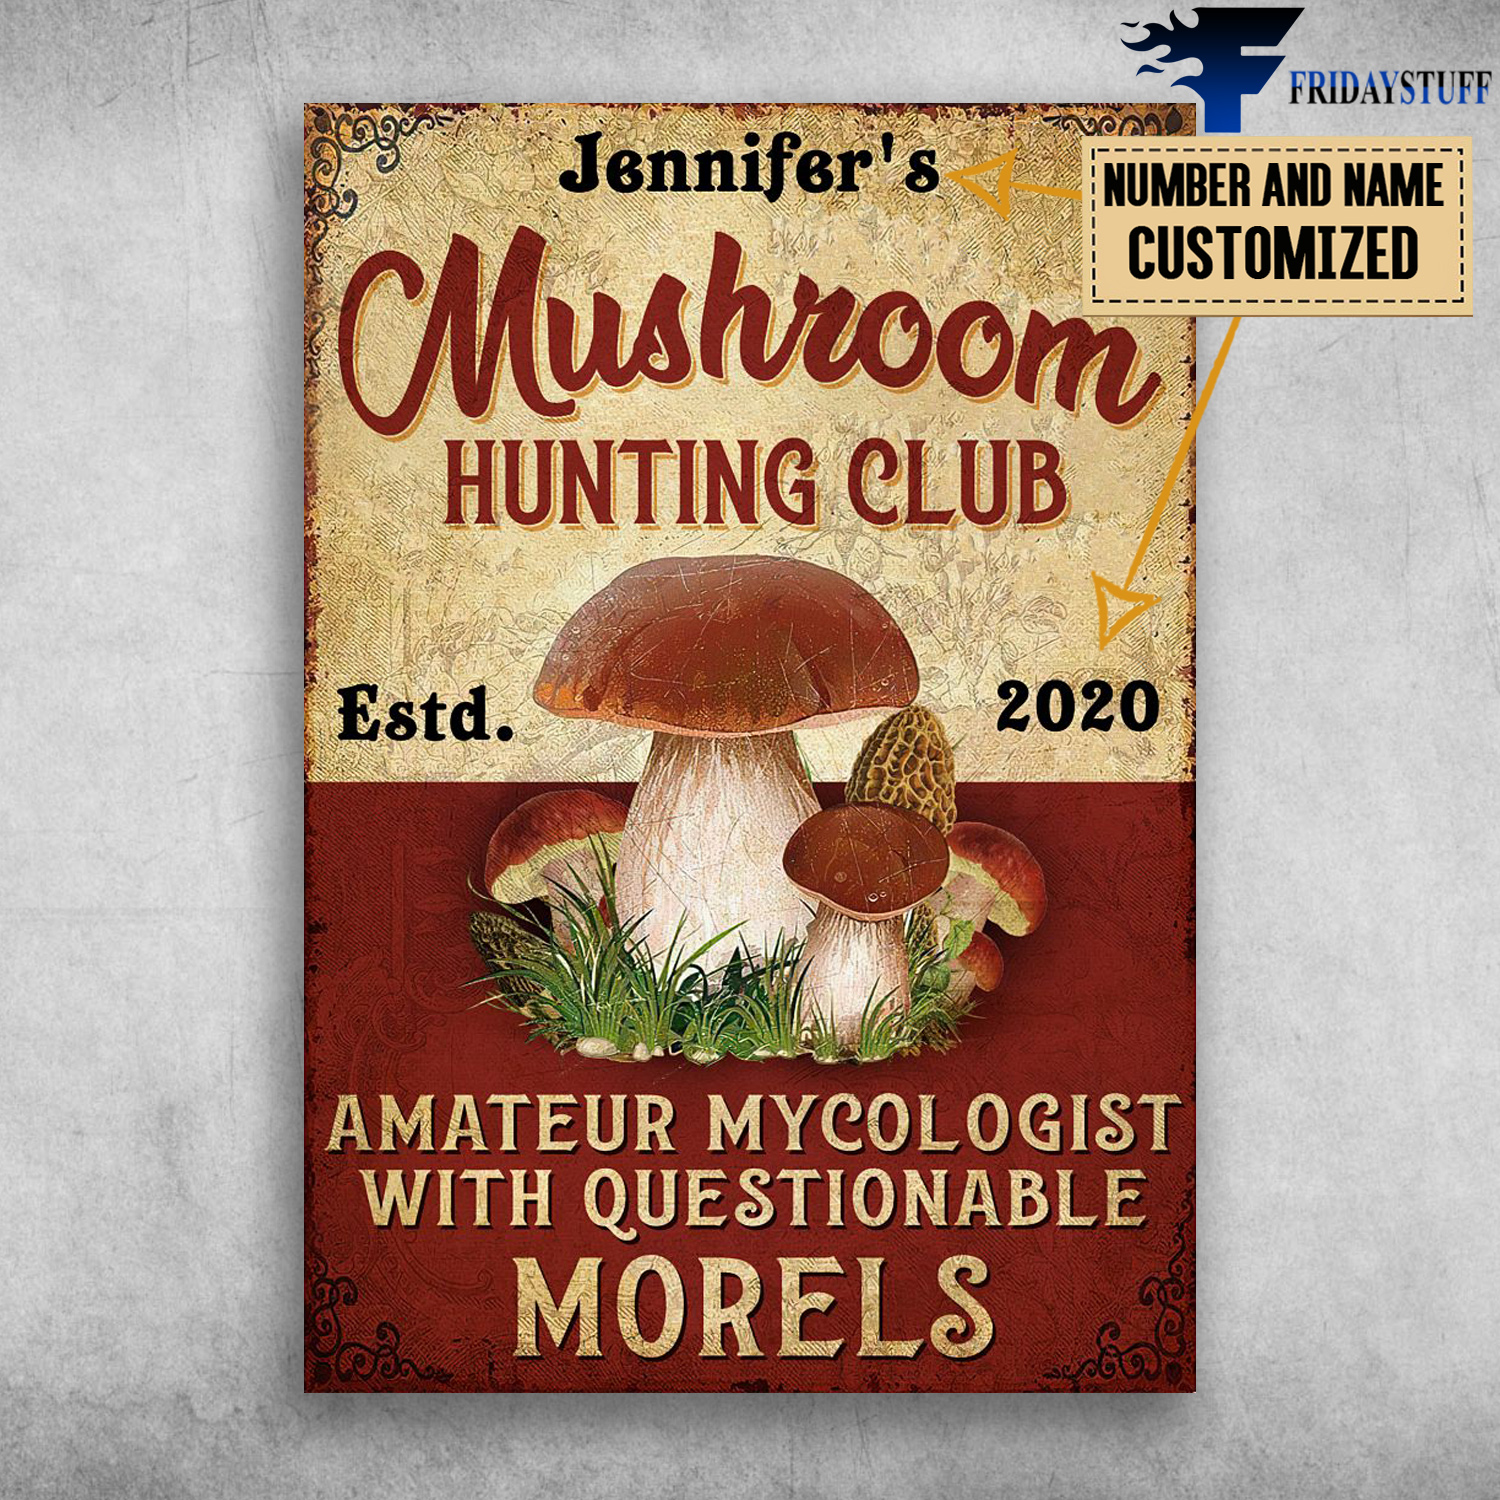 Mushroom Hunting Club, Amateur Mycologist, With Questionable Morels